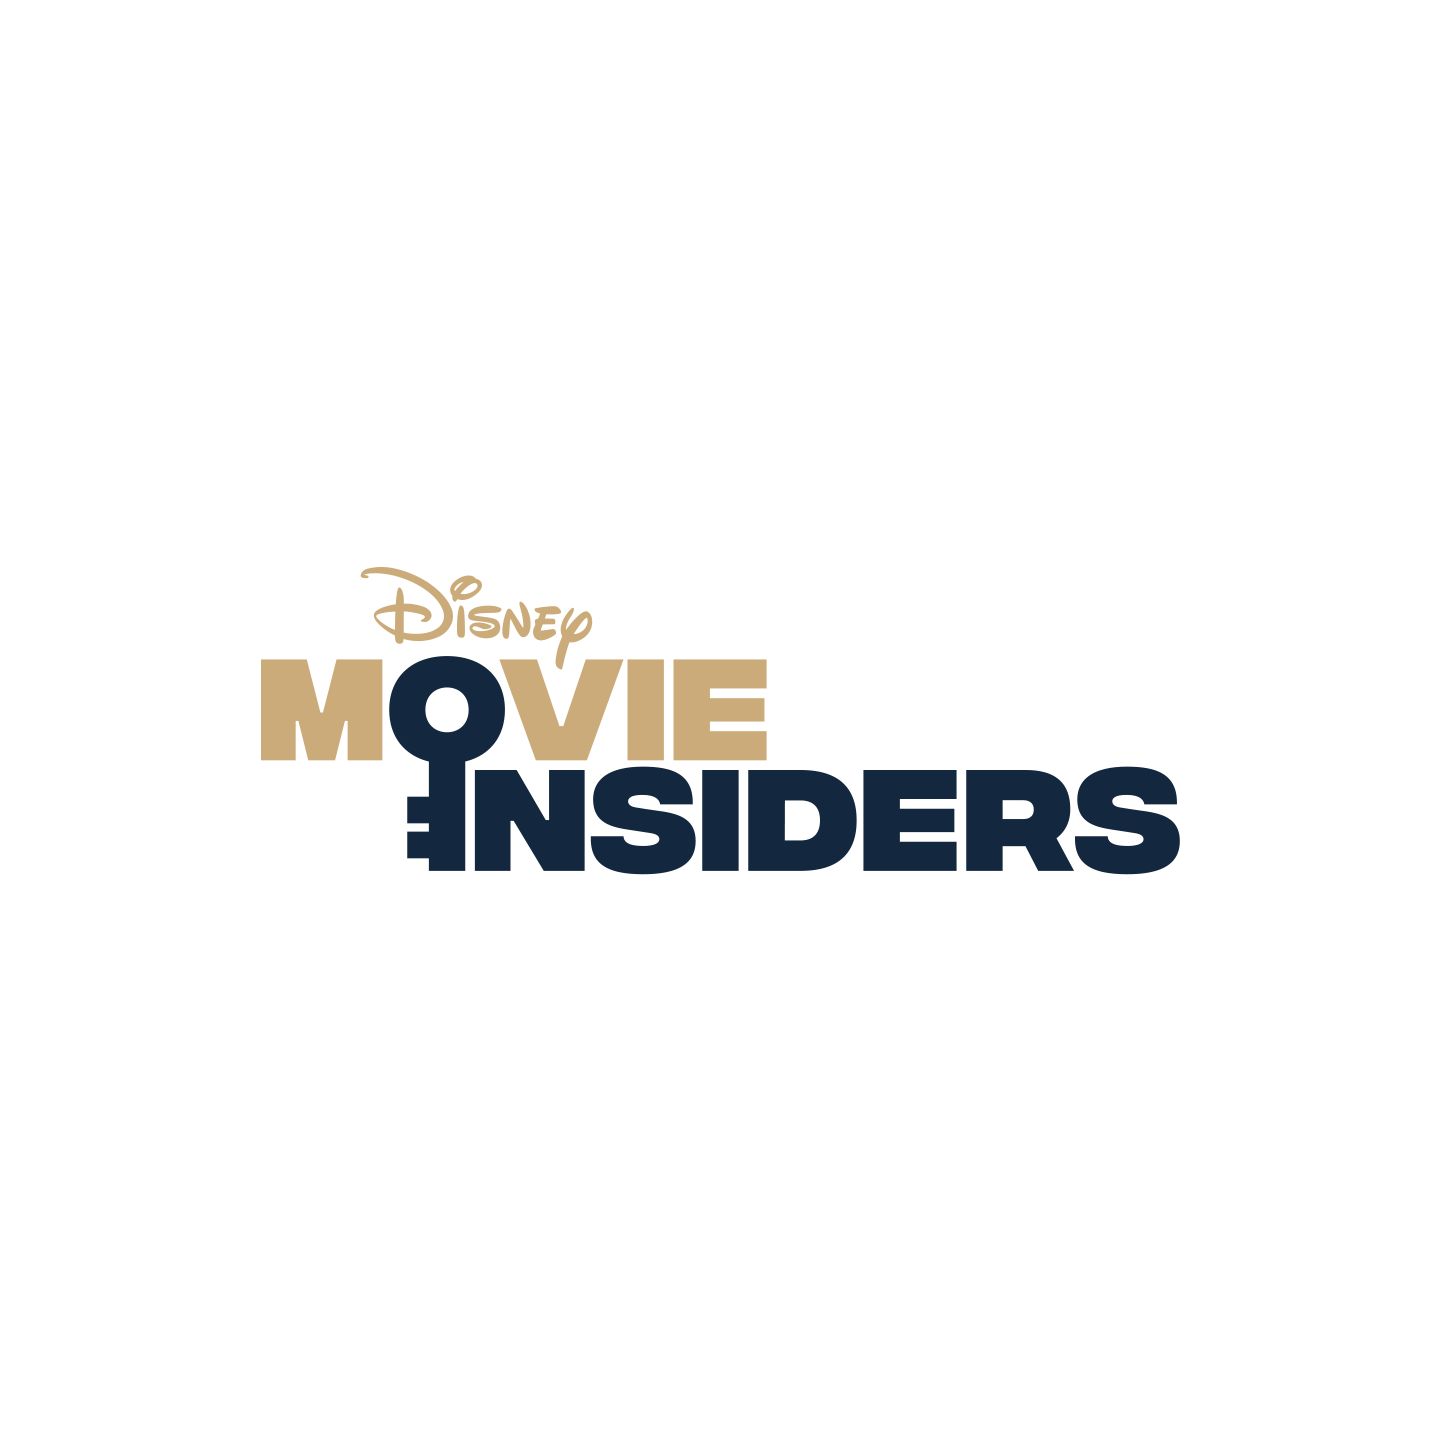 Disney Movie Insiders Presents - ETERNALS IN THEATERS NOVEMBER 5 - Listen to our new episode to get ready for the latest movie from Marvel Studios. LISTEN NOW